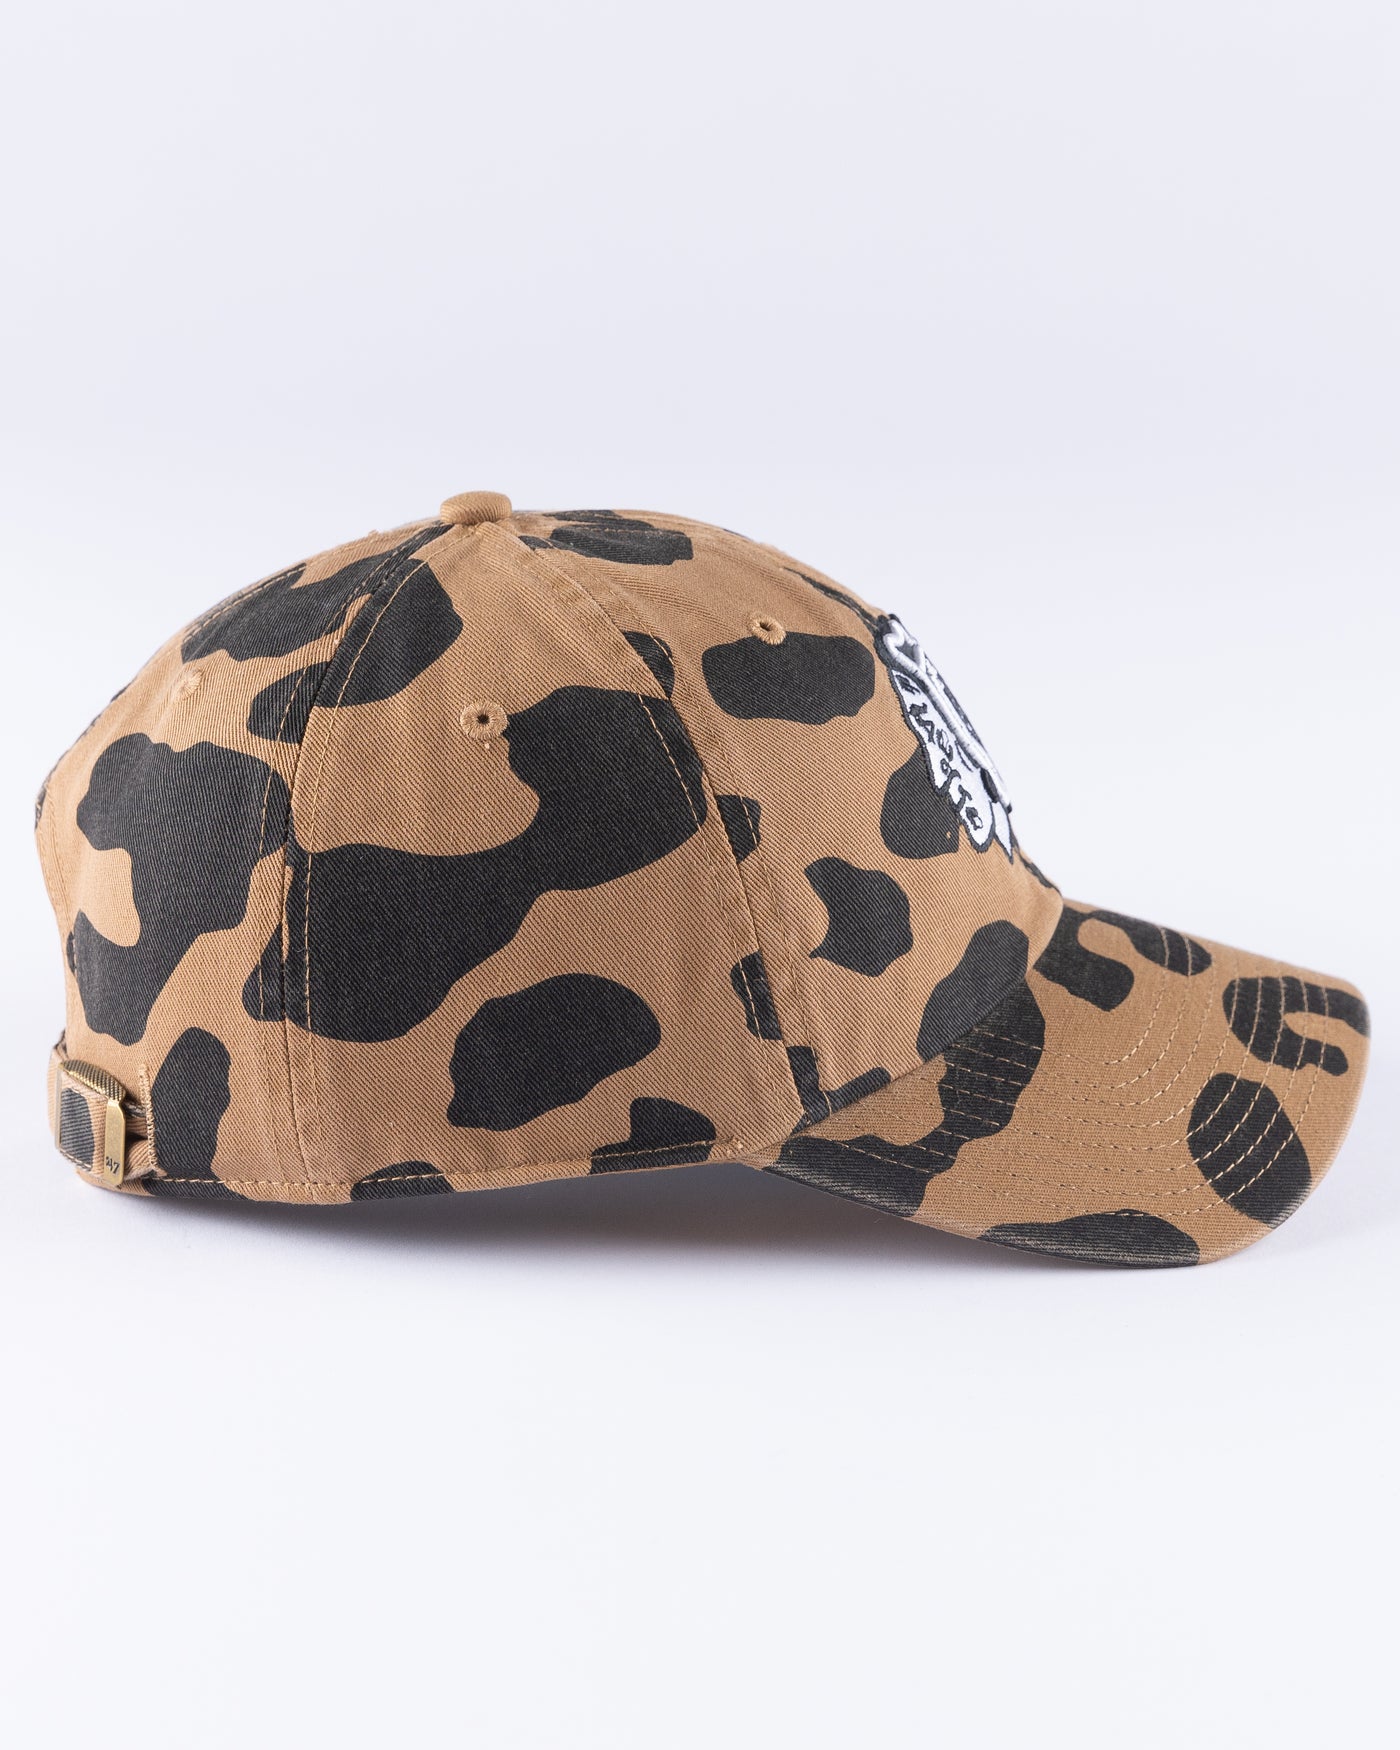 camel '47 brand women's adjustable cap with all over pattern and embroidered tonal Chicago Blackhawks primary logo across front - right side lay flat 